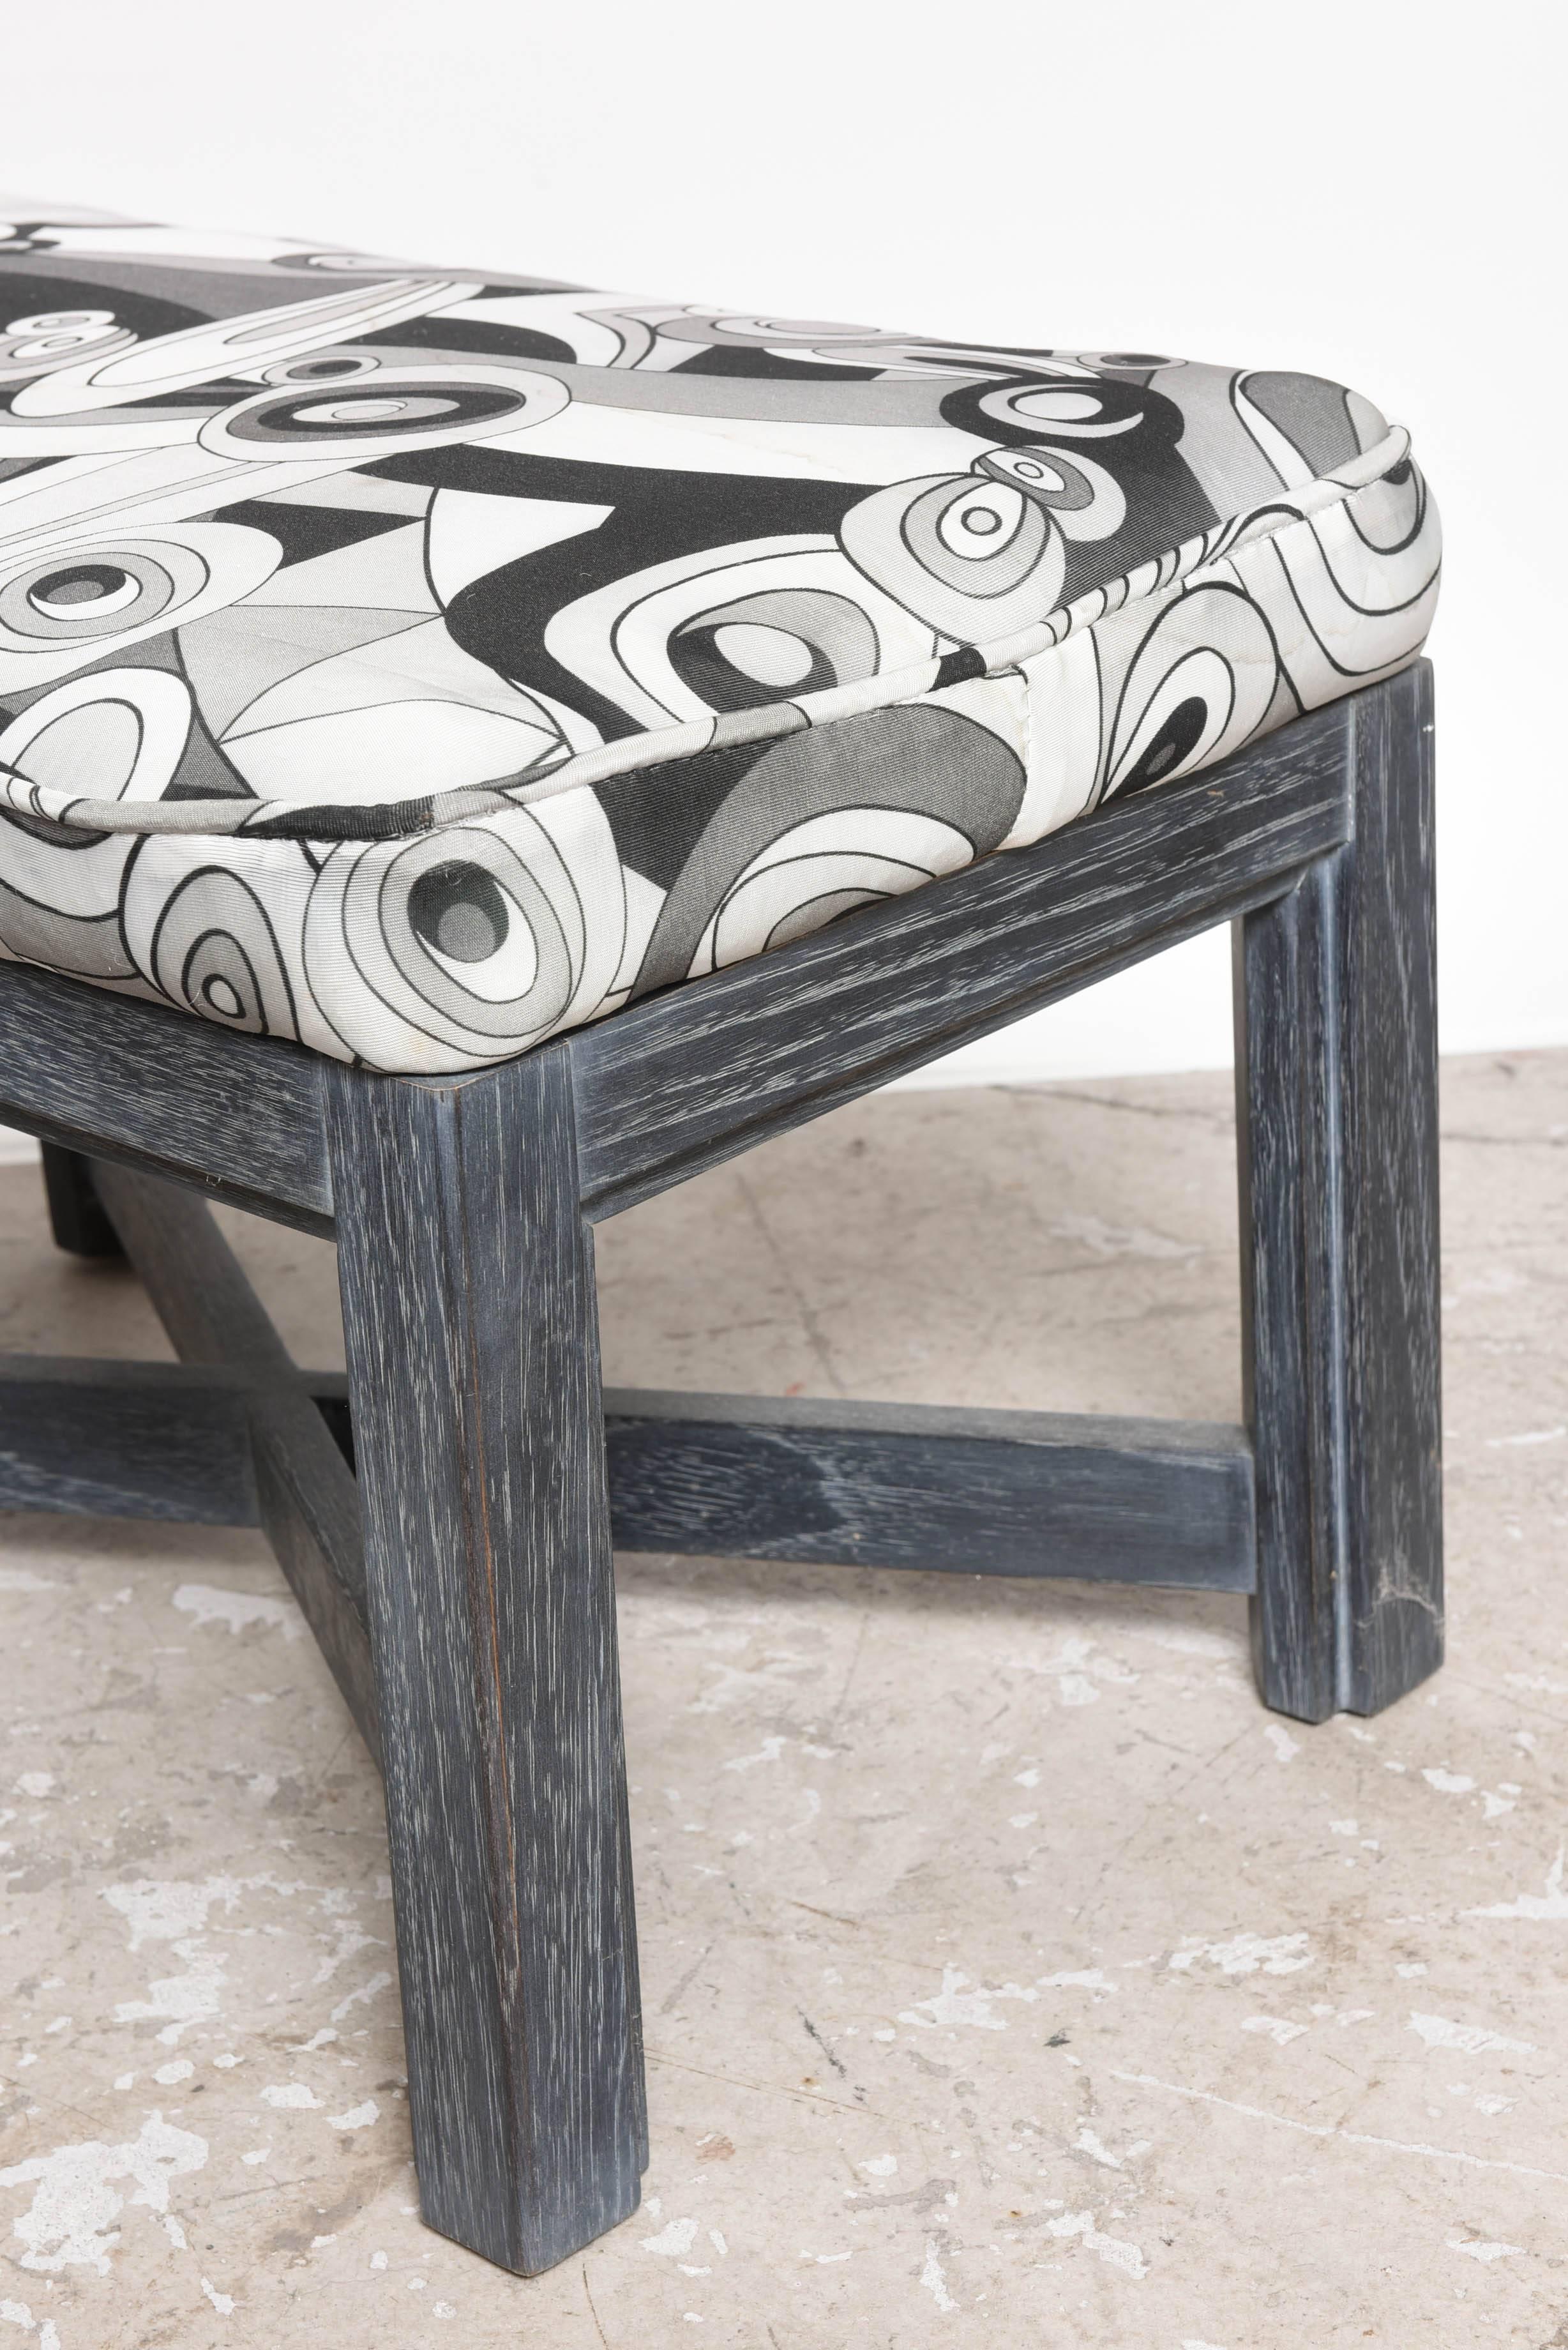 Mid-20th Century Upholstered Pair of Cerrused Oak X Base Stools  upholstered in Pucci Fabric